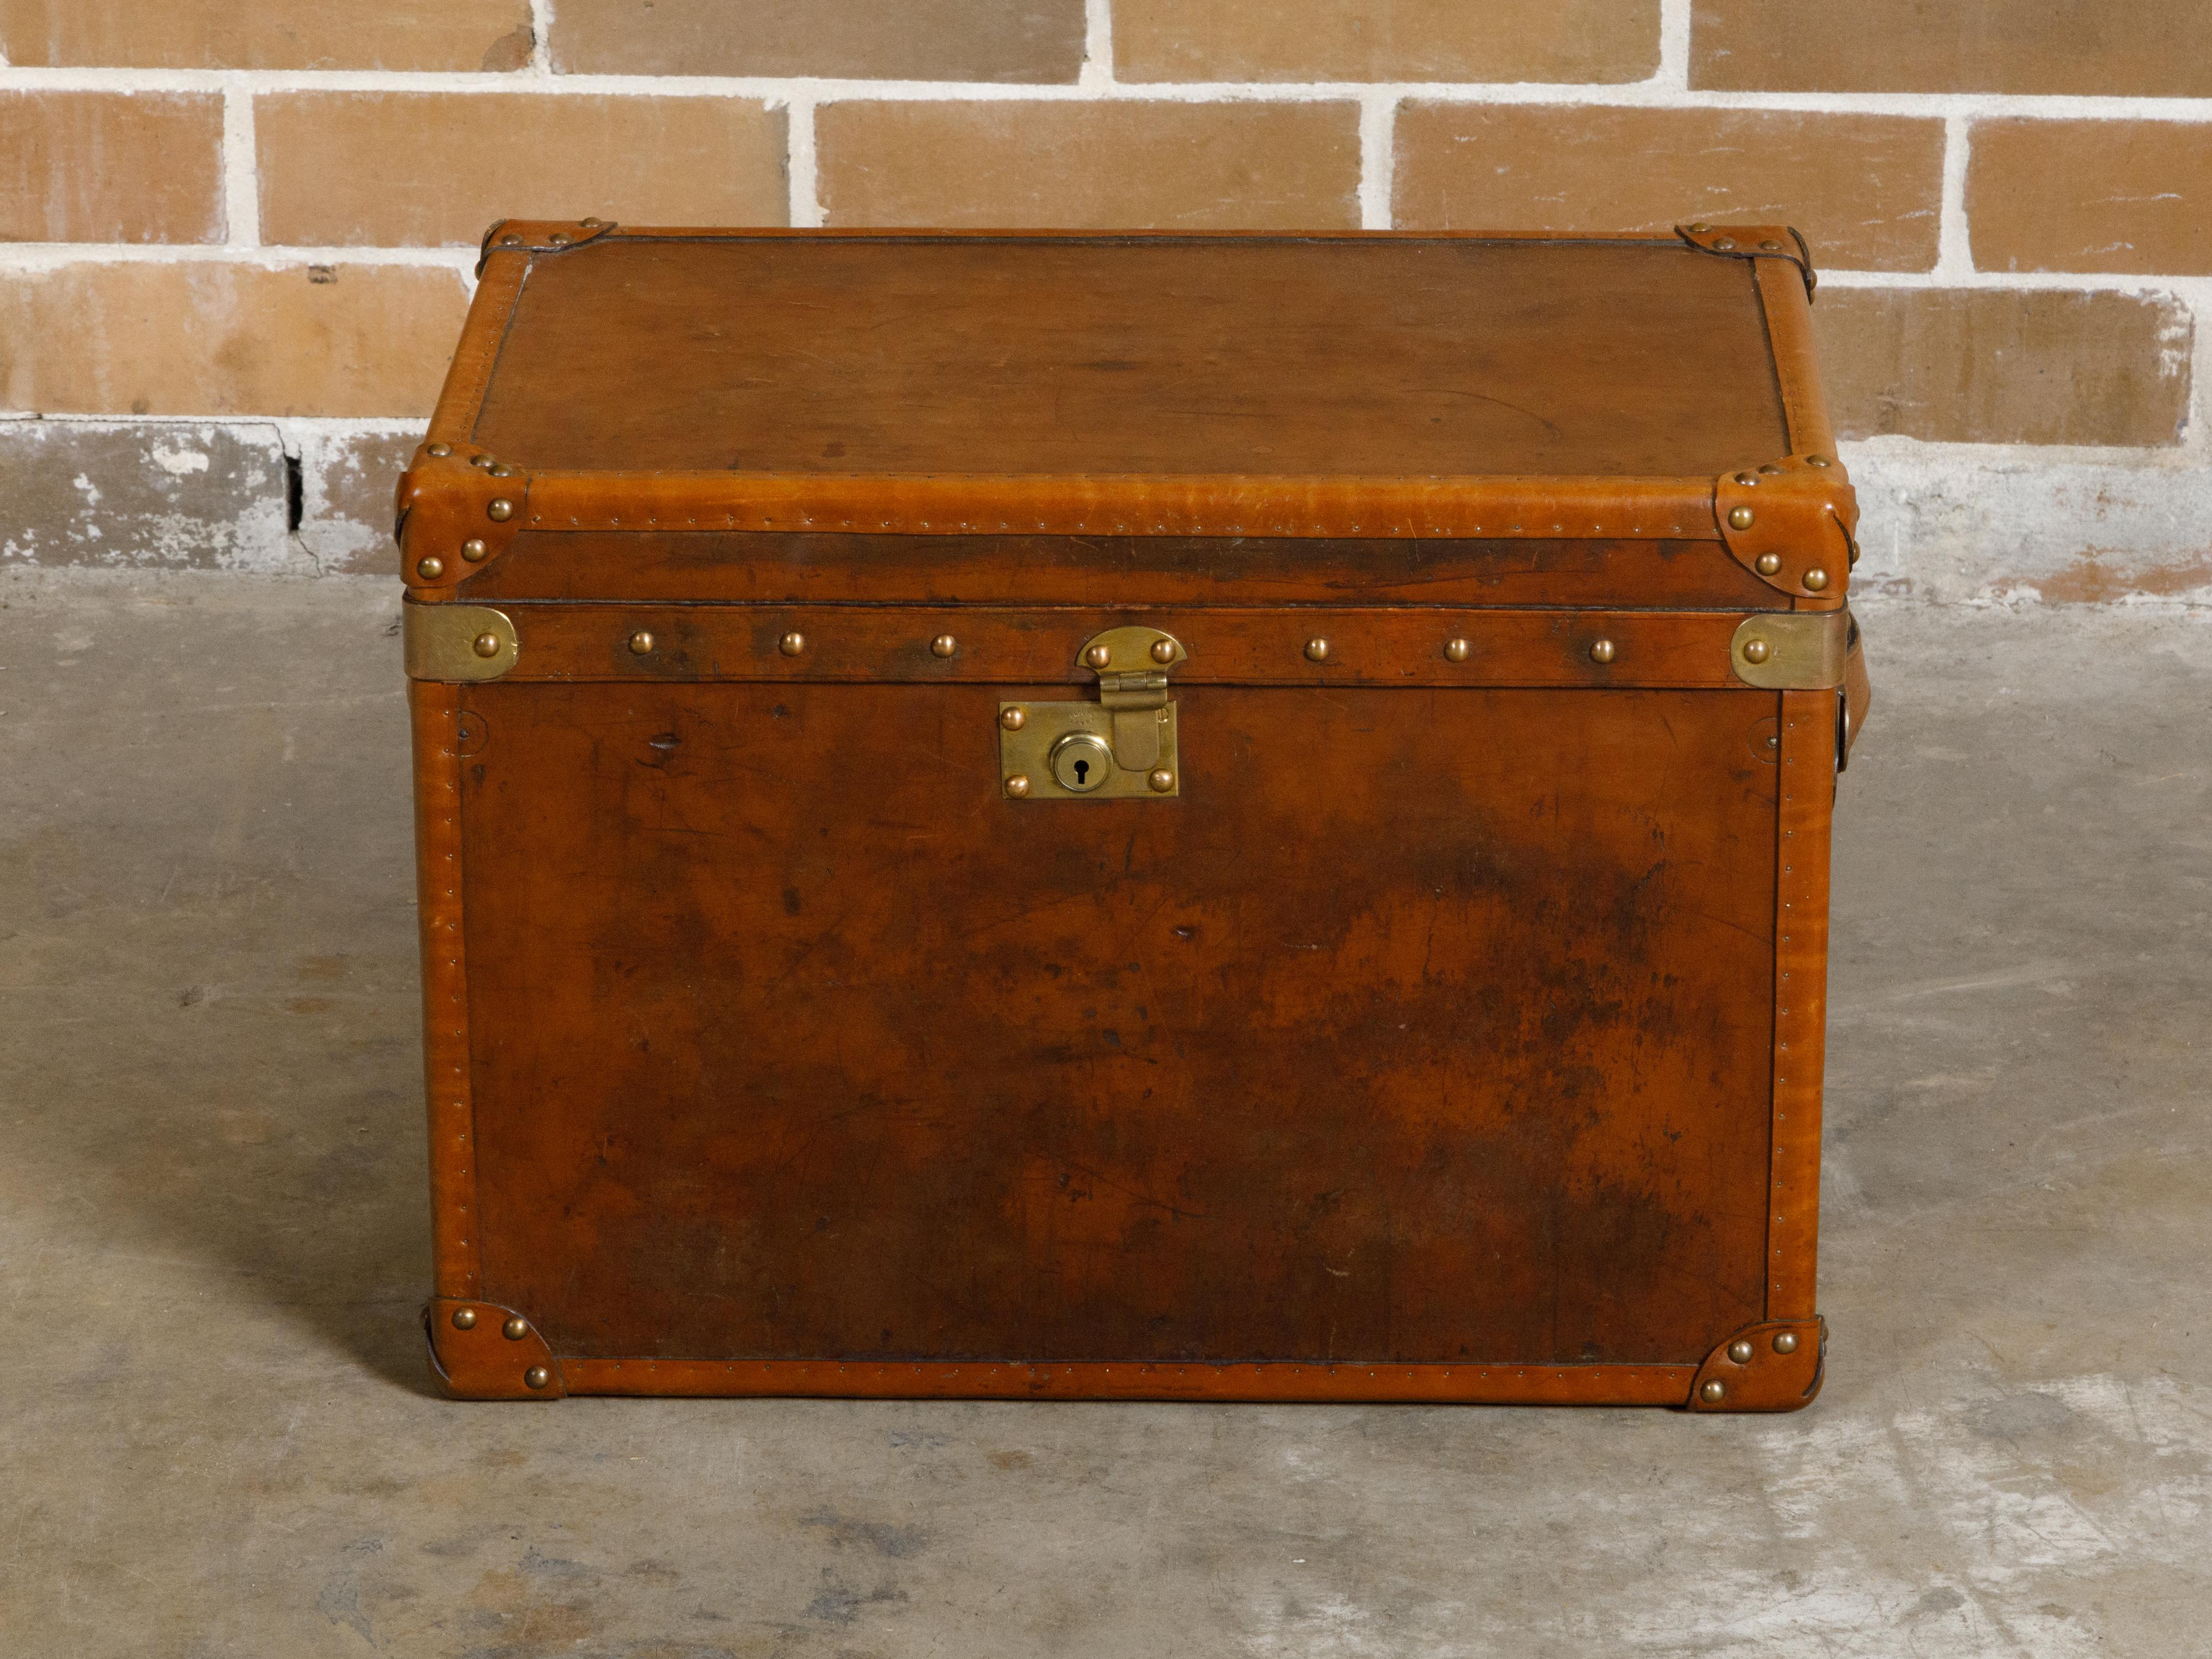 An English Turn of the Century leather trunk from circa 1900 with brass accents, lateral handles and monogram. This English Turn of the Century leather trunk, dating back to circa 1900, presents a remarkable blend of vintage allure and timeless